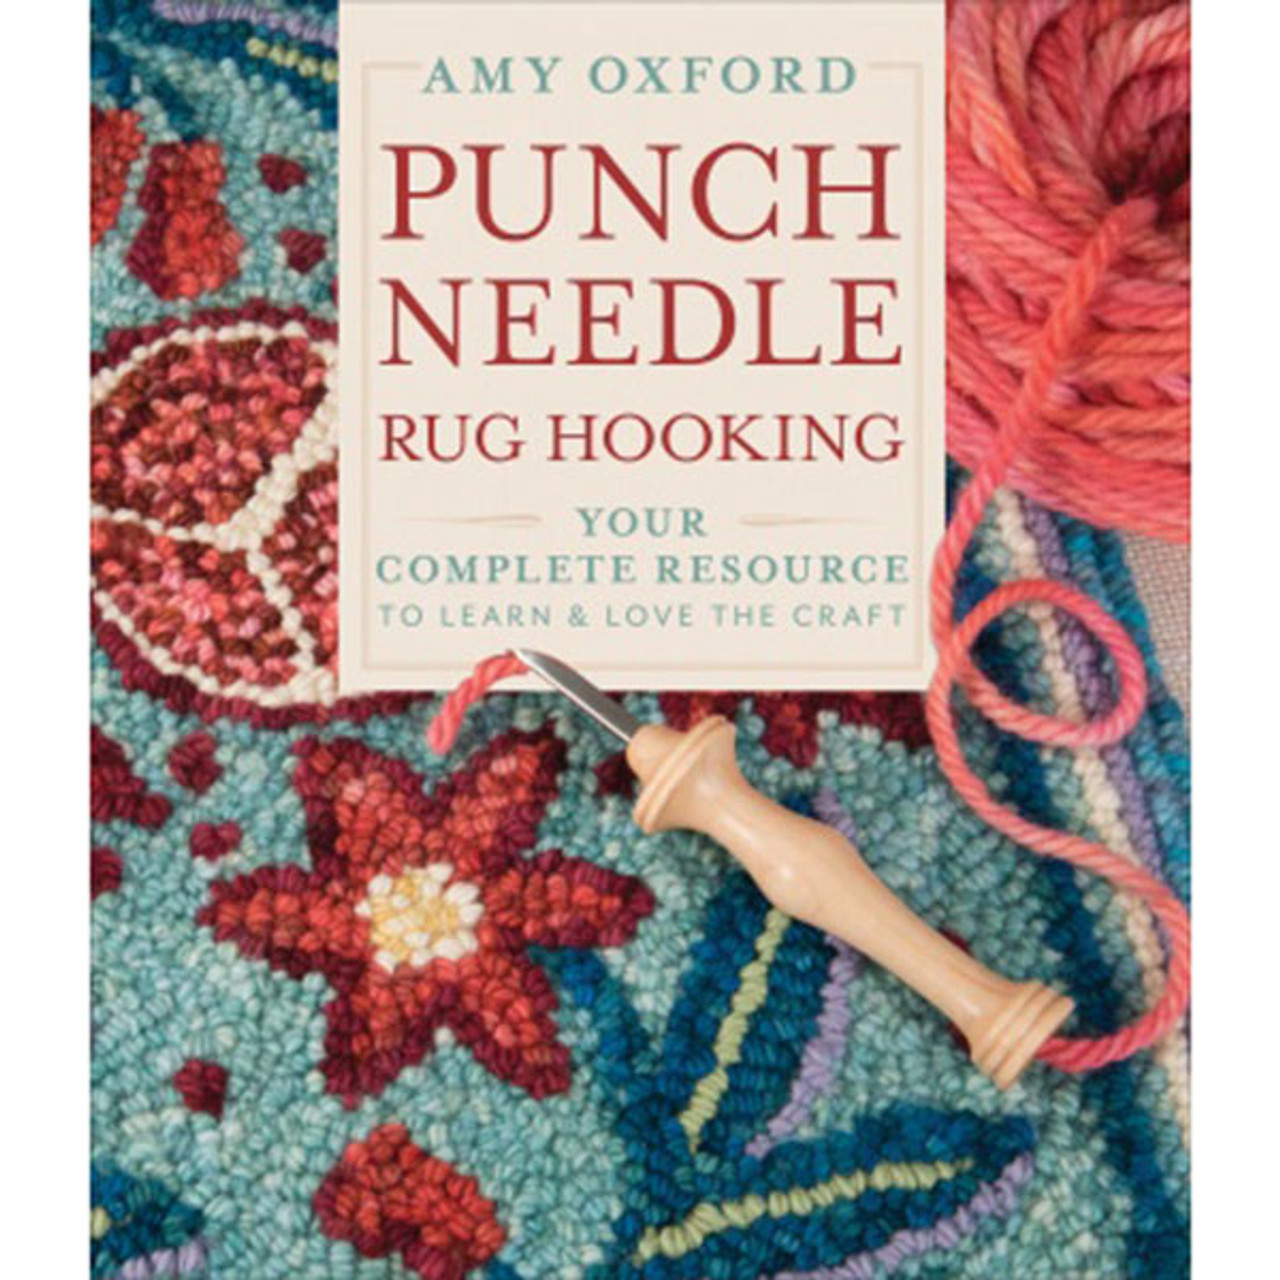 Amy Oxford Punch Needle Rug Hooking